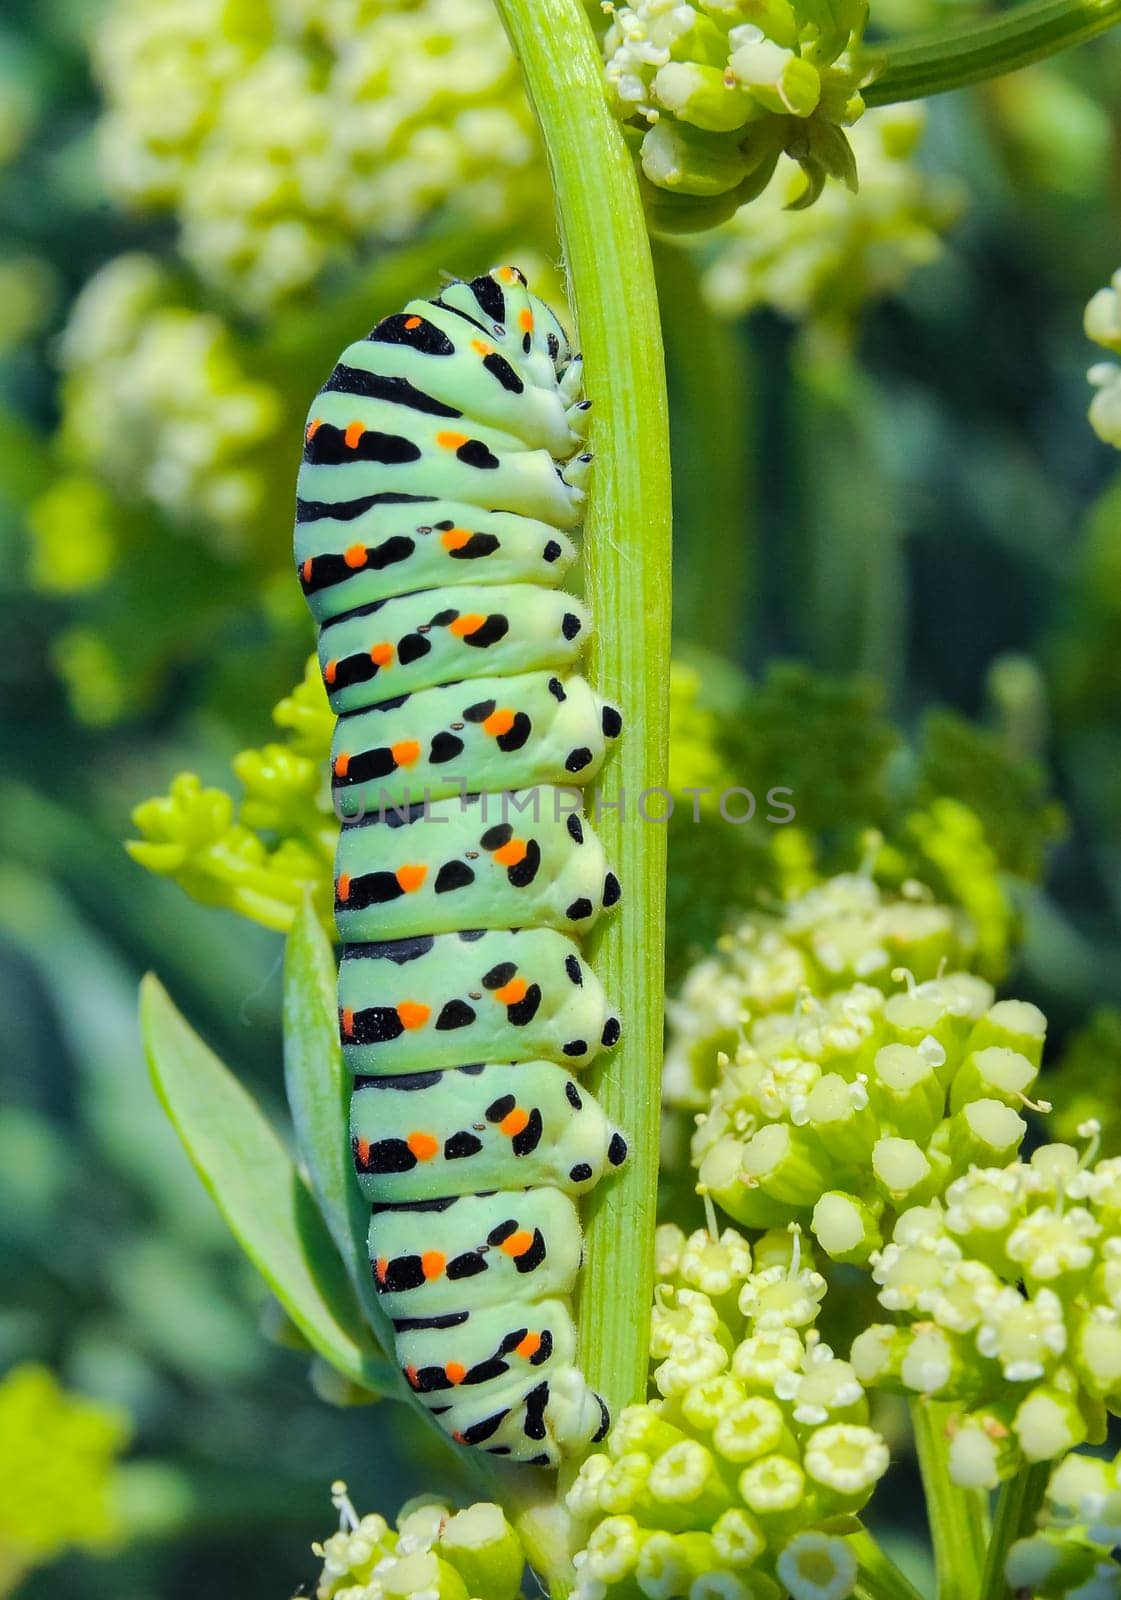 (Papilio machaon), A swallowtail butterfly caterpillar sitting on a plant, eastern Crimea